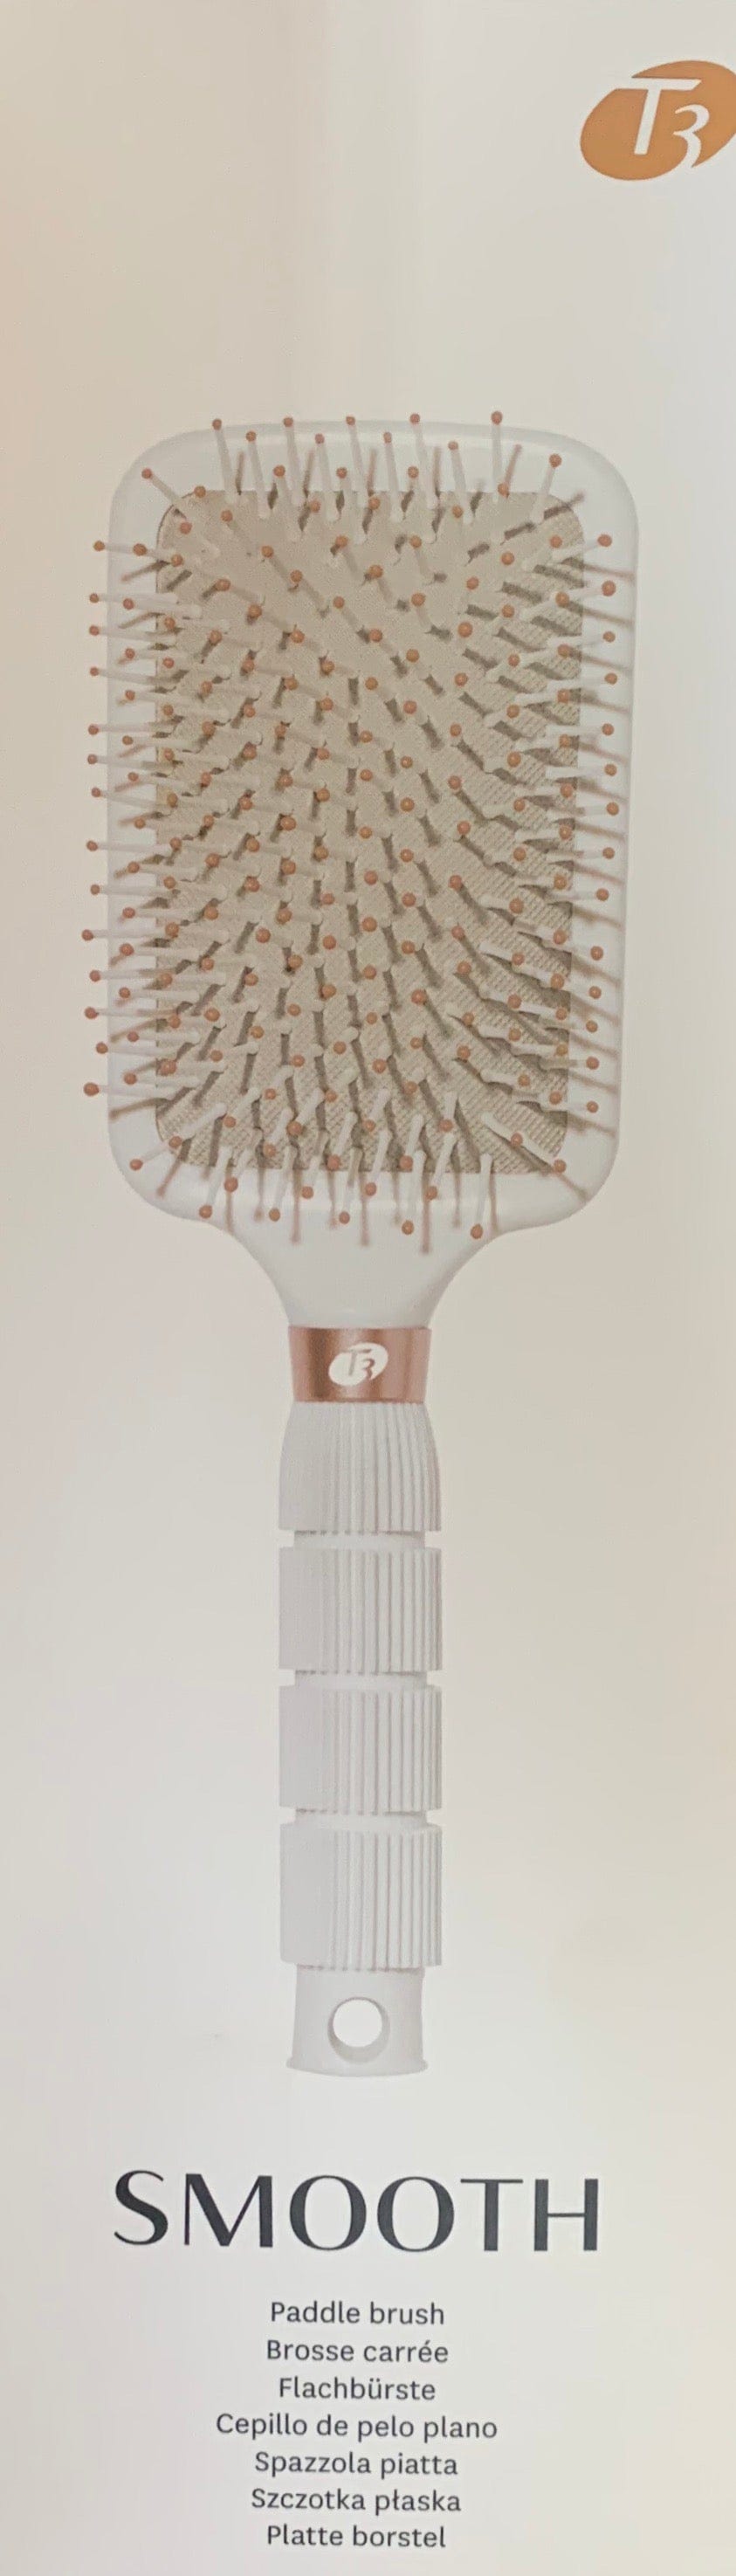 Hair Brush T3 Micro Paddle Brush Smooth Heat Resistant Combs & Brushes